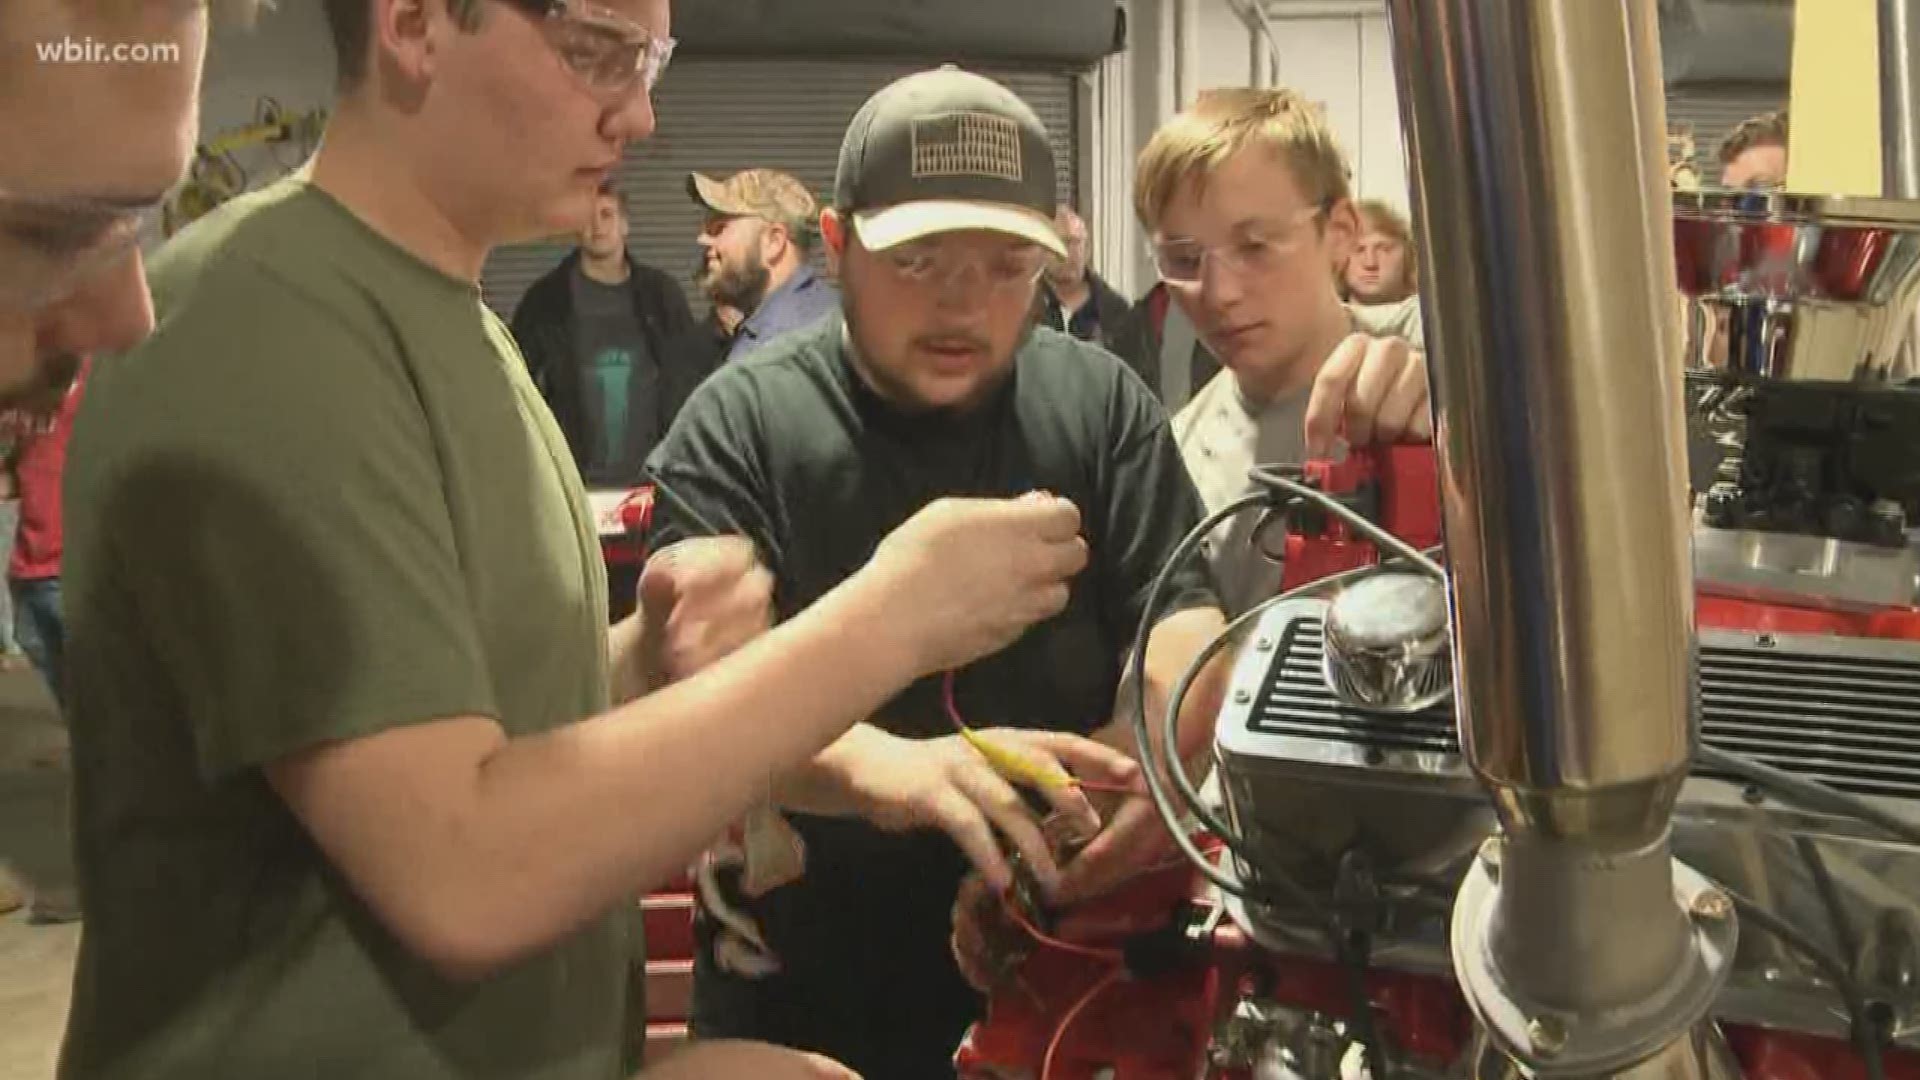 Six hundred students from schools all over East Tennessee rolled up their sleeves to use some "elbow grease" and prove they have the right stuff to be a future mechanic.